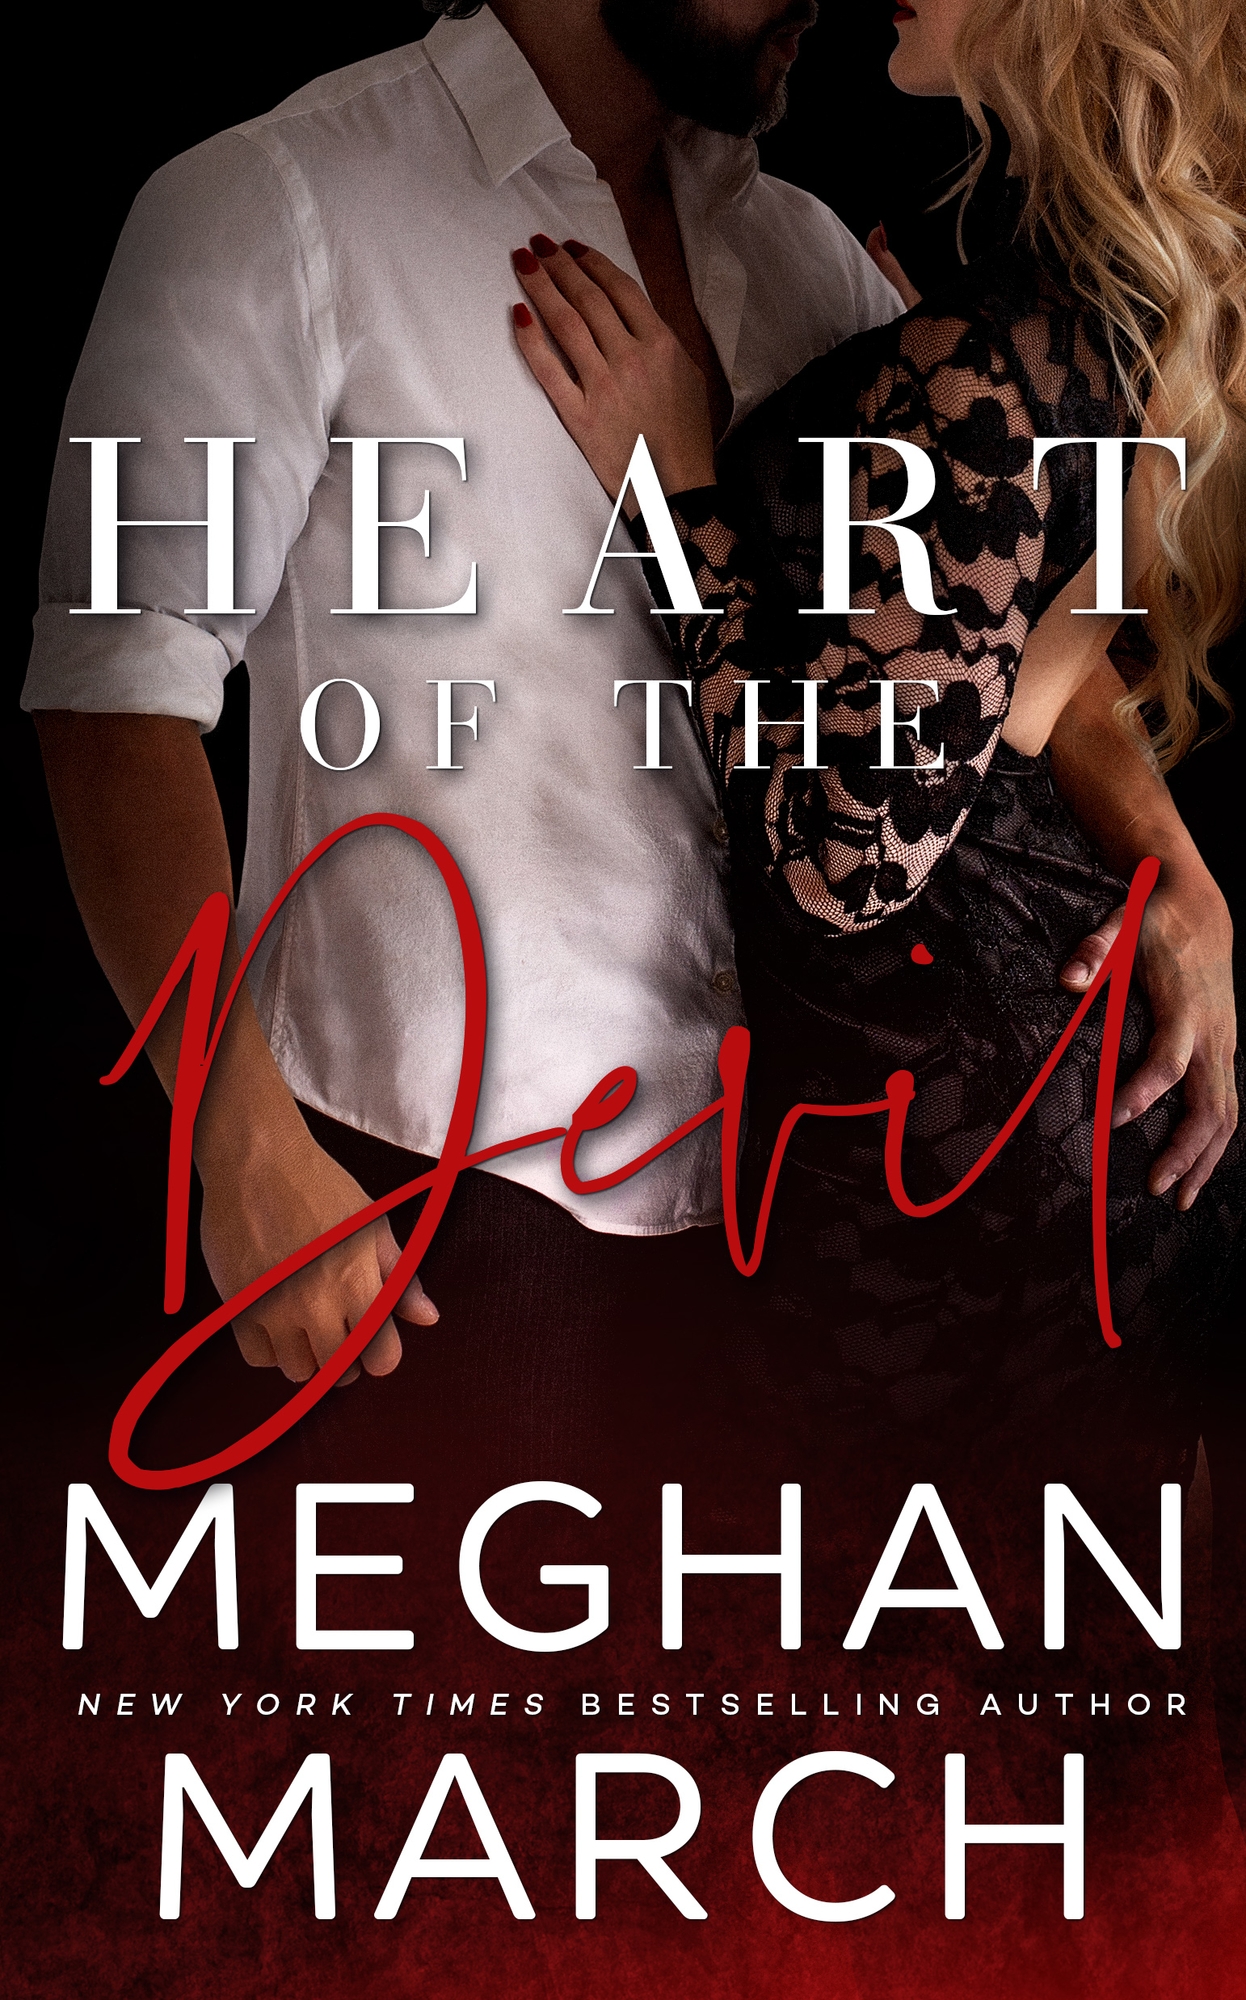 Heart of the Devil by Meghan March [Review]